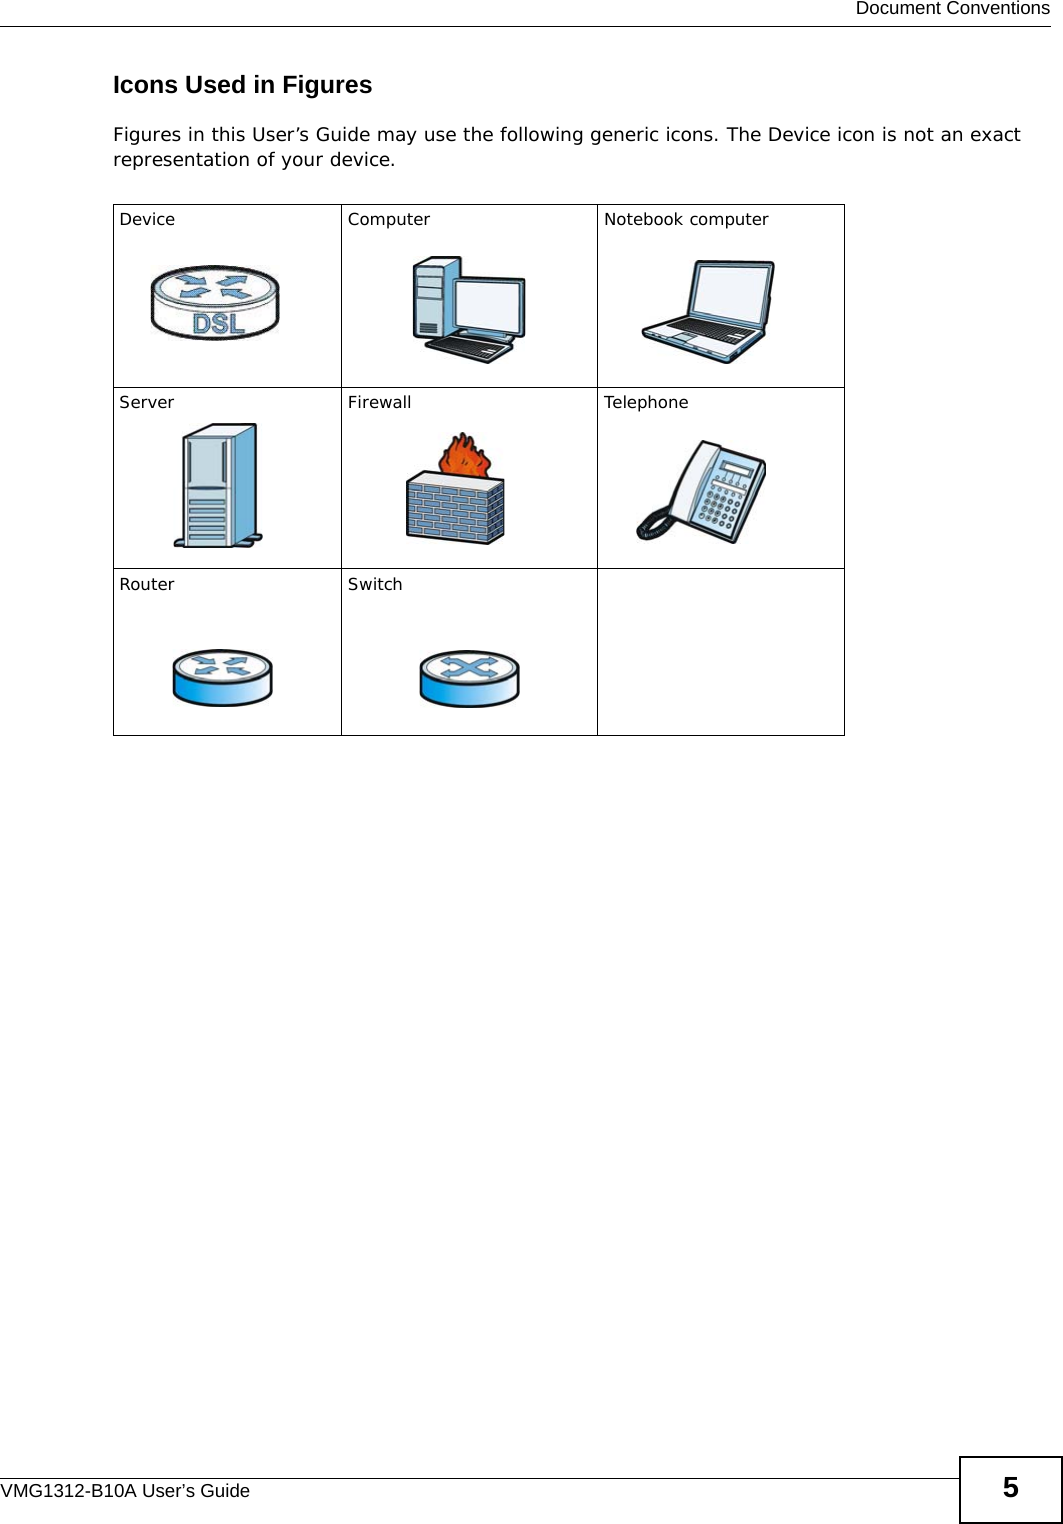  Document ConventionsVMG1312-B10A User’s Guide 5Icons Used in FiguresFigures in this User’s Guide may use the following generic icons. The Device icon is not an exact representation of your device.Device Computer Notebook computerServer Firewall TelephoneRouter Switch